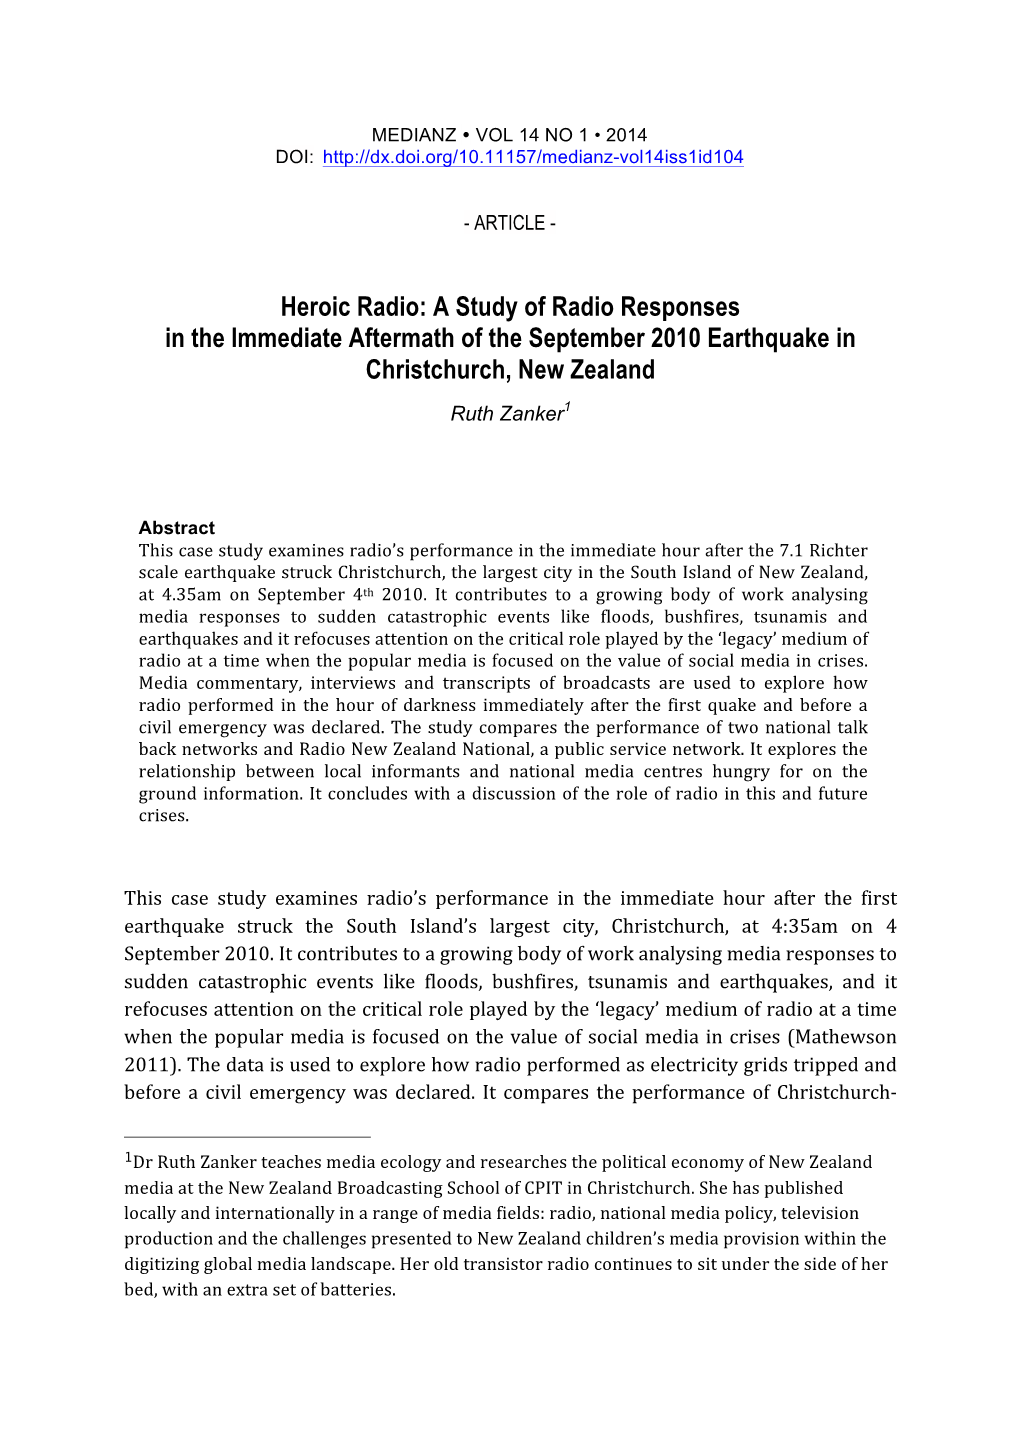 Heroic Radio: a Study of Radio Responses in the Immediate Aftermath of the September 2010 Earthquake in Christchurch, New Zealand Ruth Zanker1